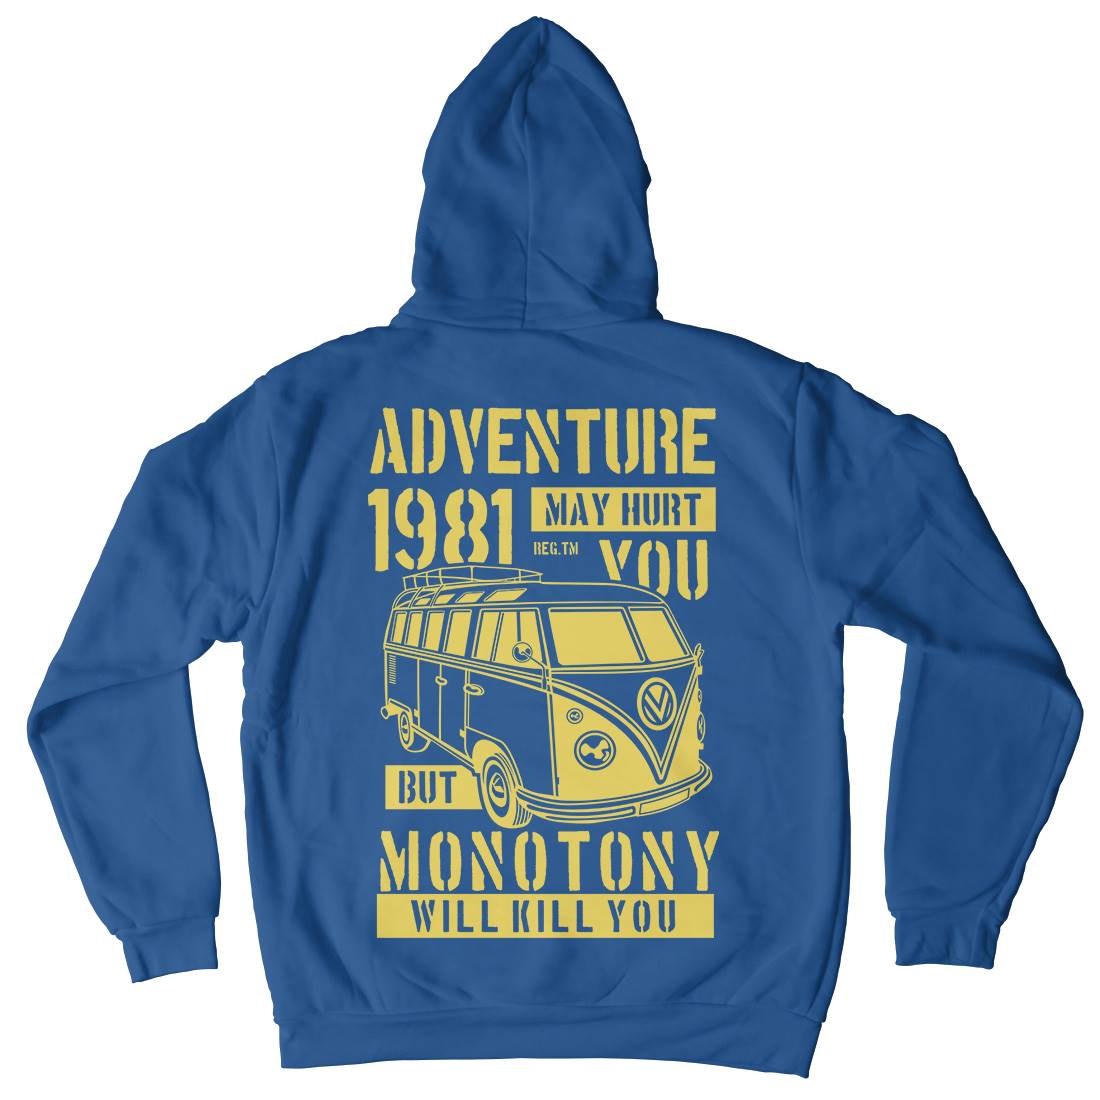 Adventure May Hurt You Mens Hoodie With Pocket Nature B175